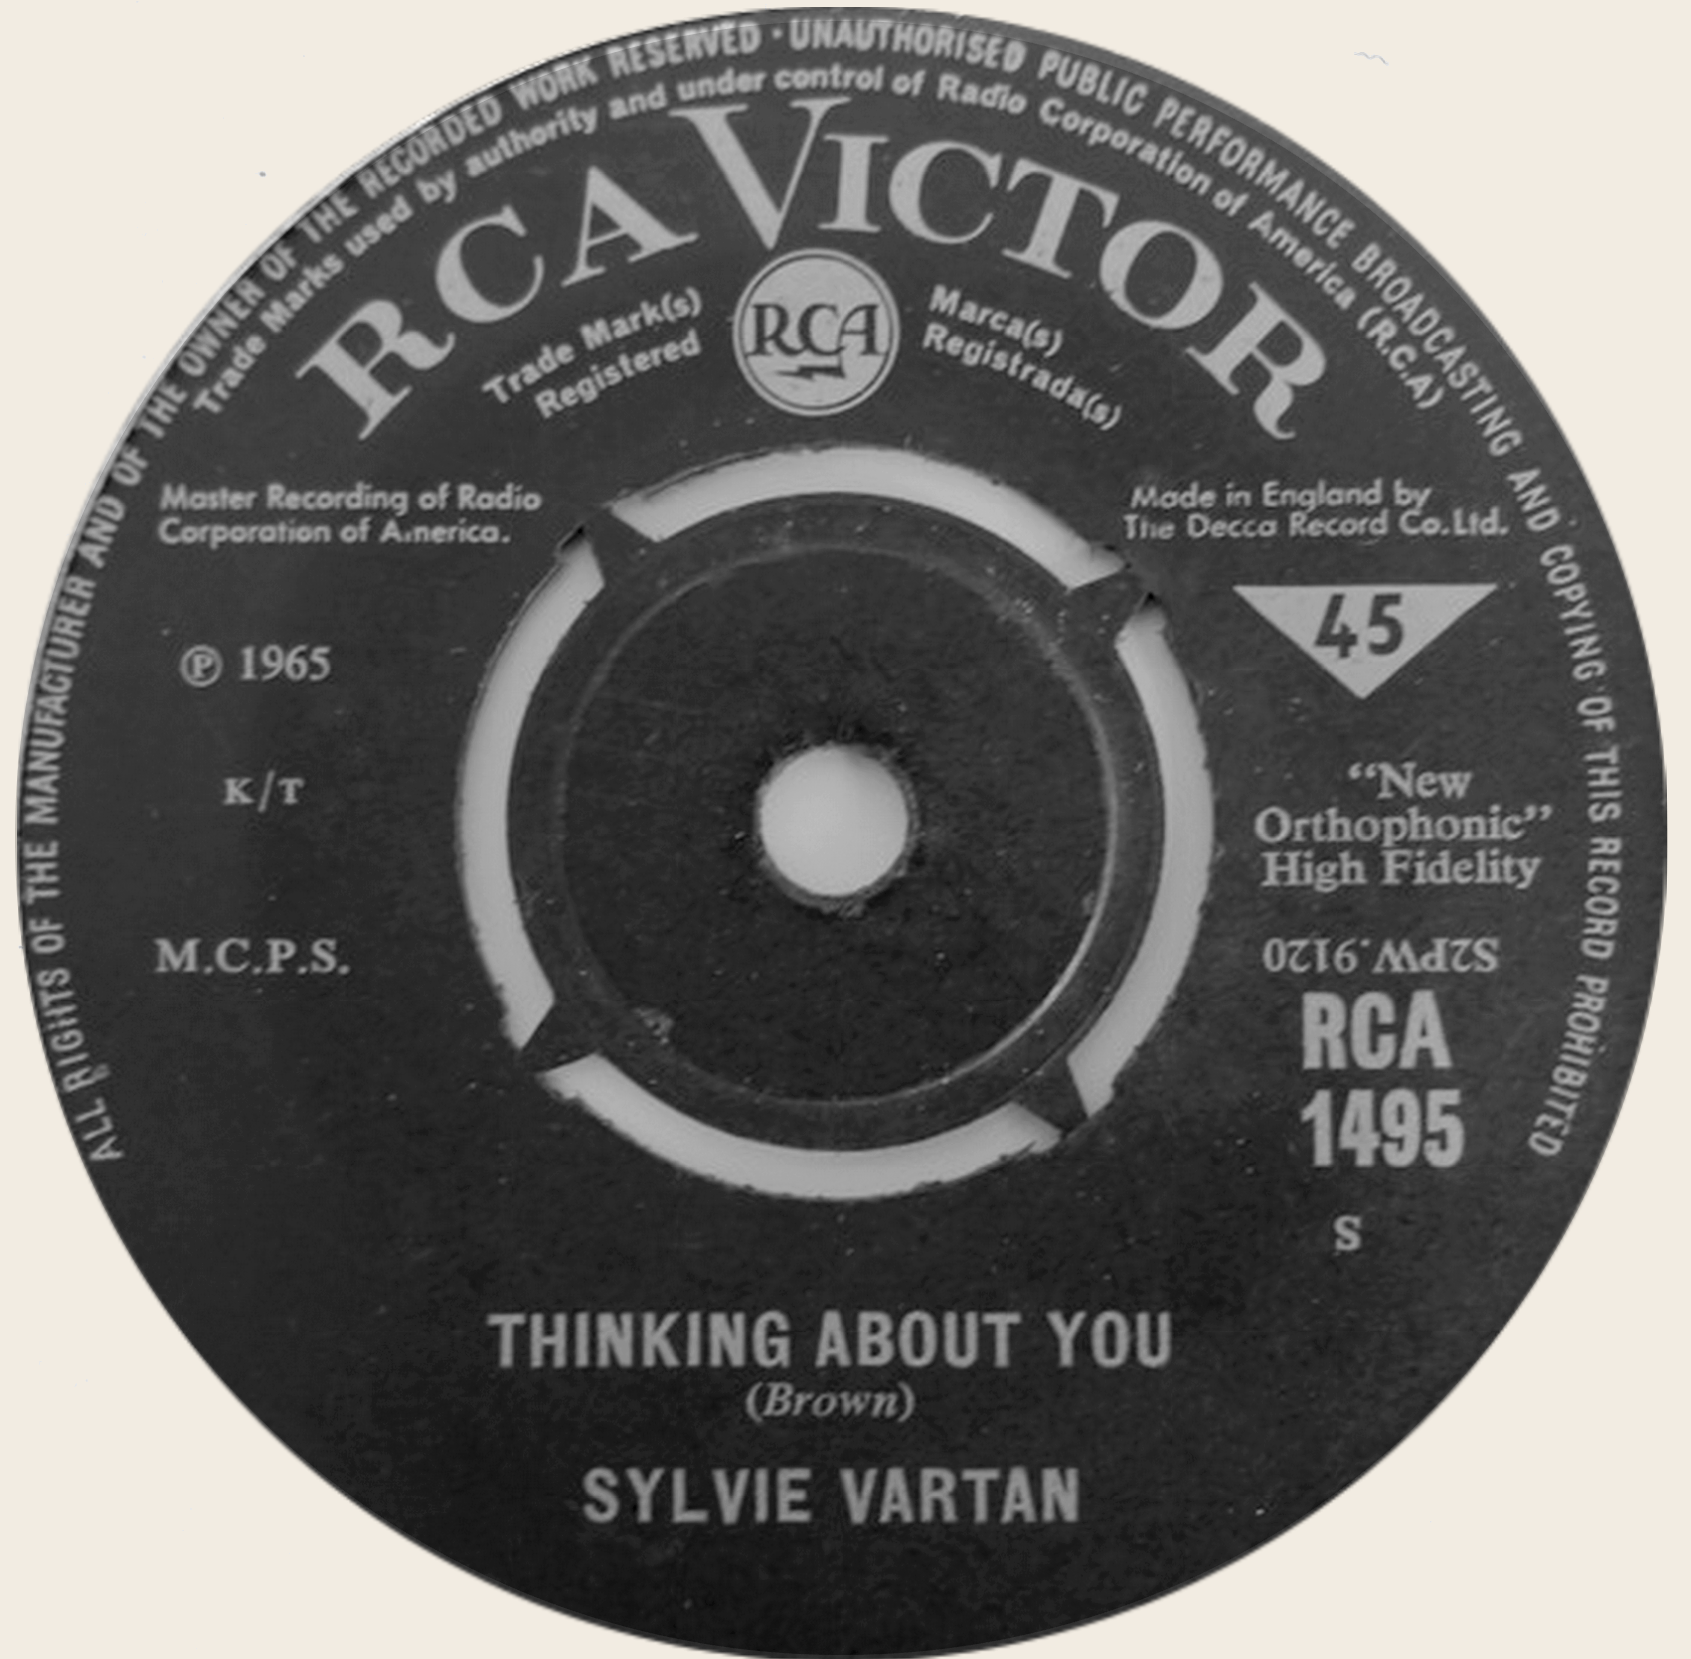 Sylvie Vartan SP Angleterre "Thinking about you/  Another heat"  RCA VICTOR 1495 Ⓟ 1966